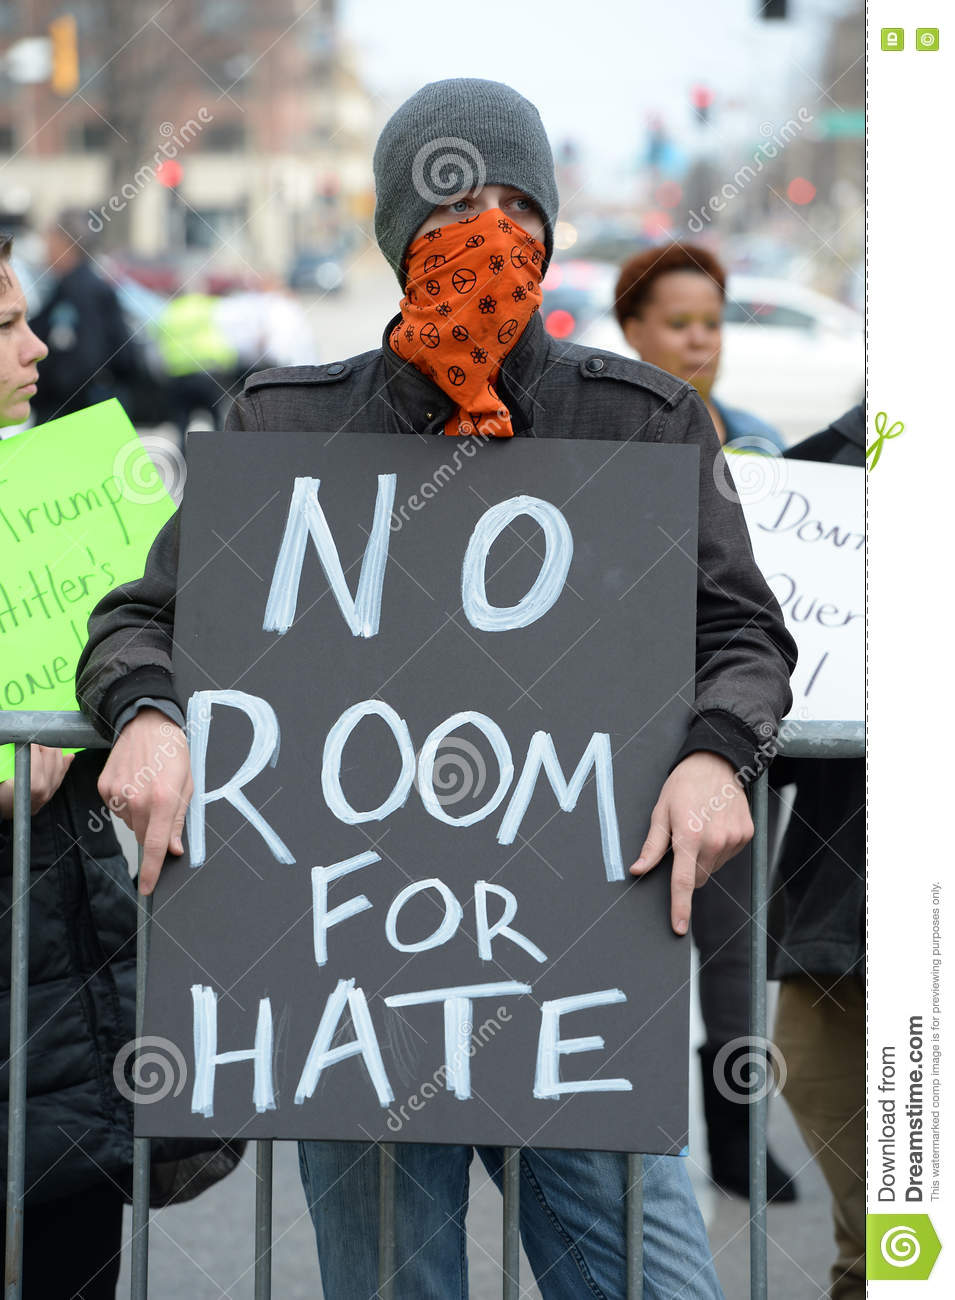 masked-protester-holding-sign-outside-trump-rally-saint-louis-mo-usa-march-hold-signs-donald-peabody-opera-house-71157398